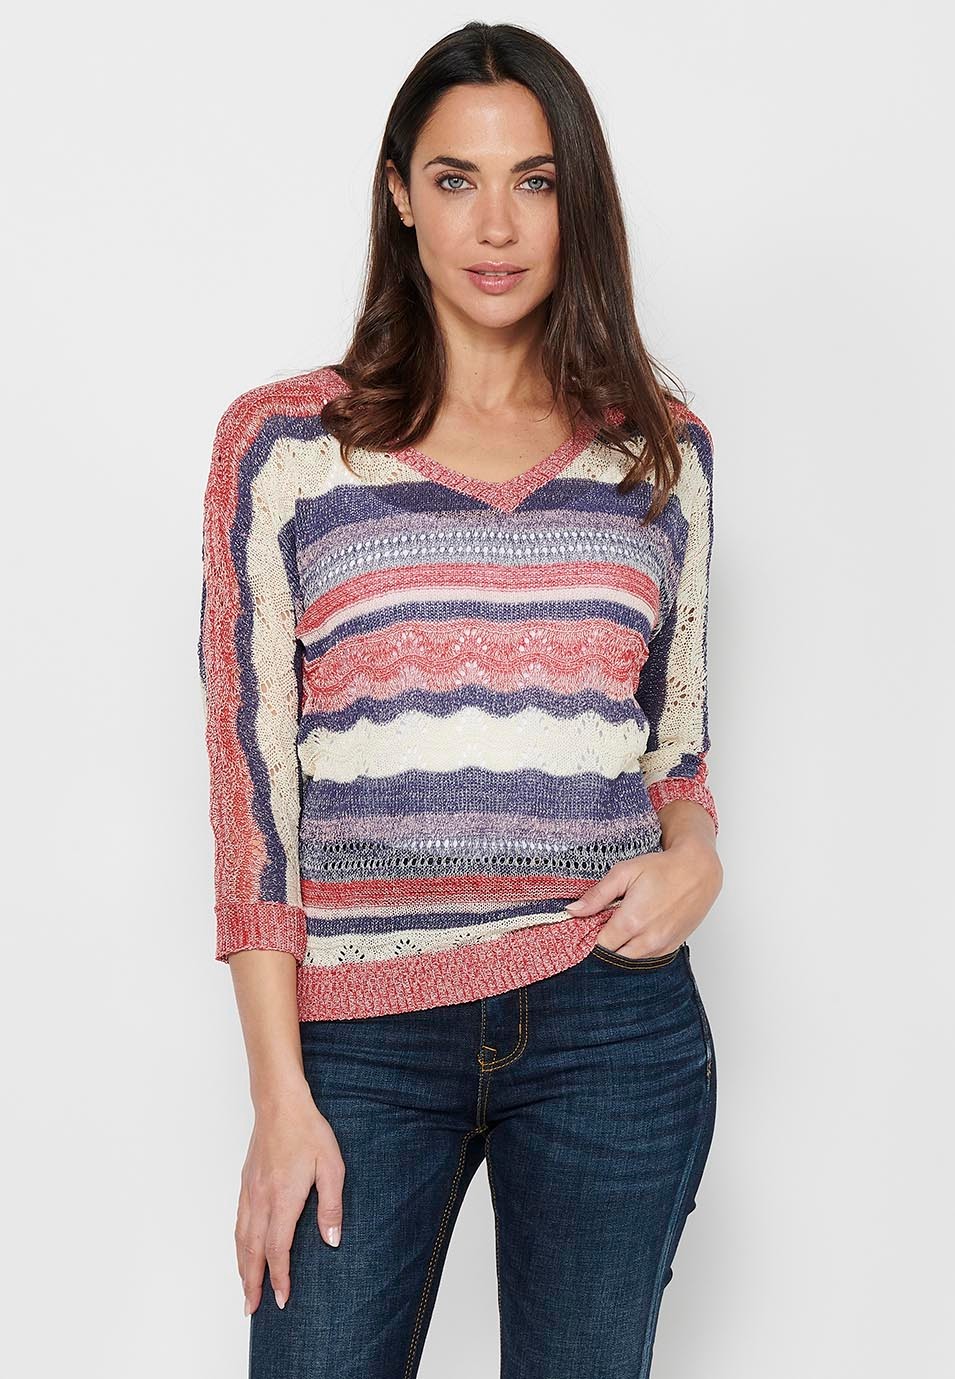 Medium sleeve sweater with V-neck. Multicolor Striped Openwork Tricot for Women 2